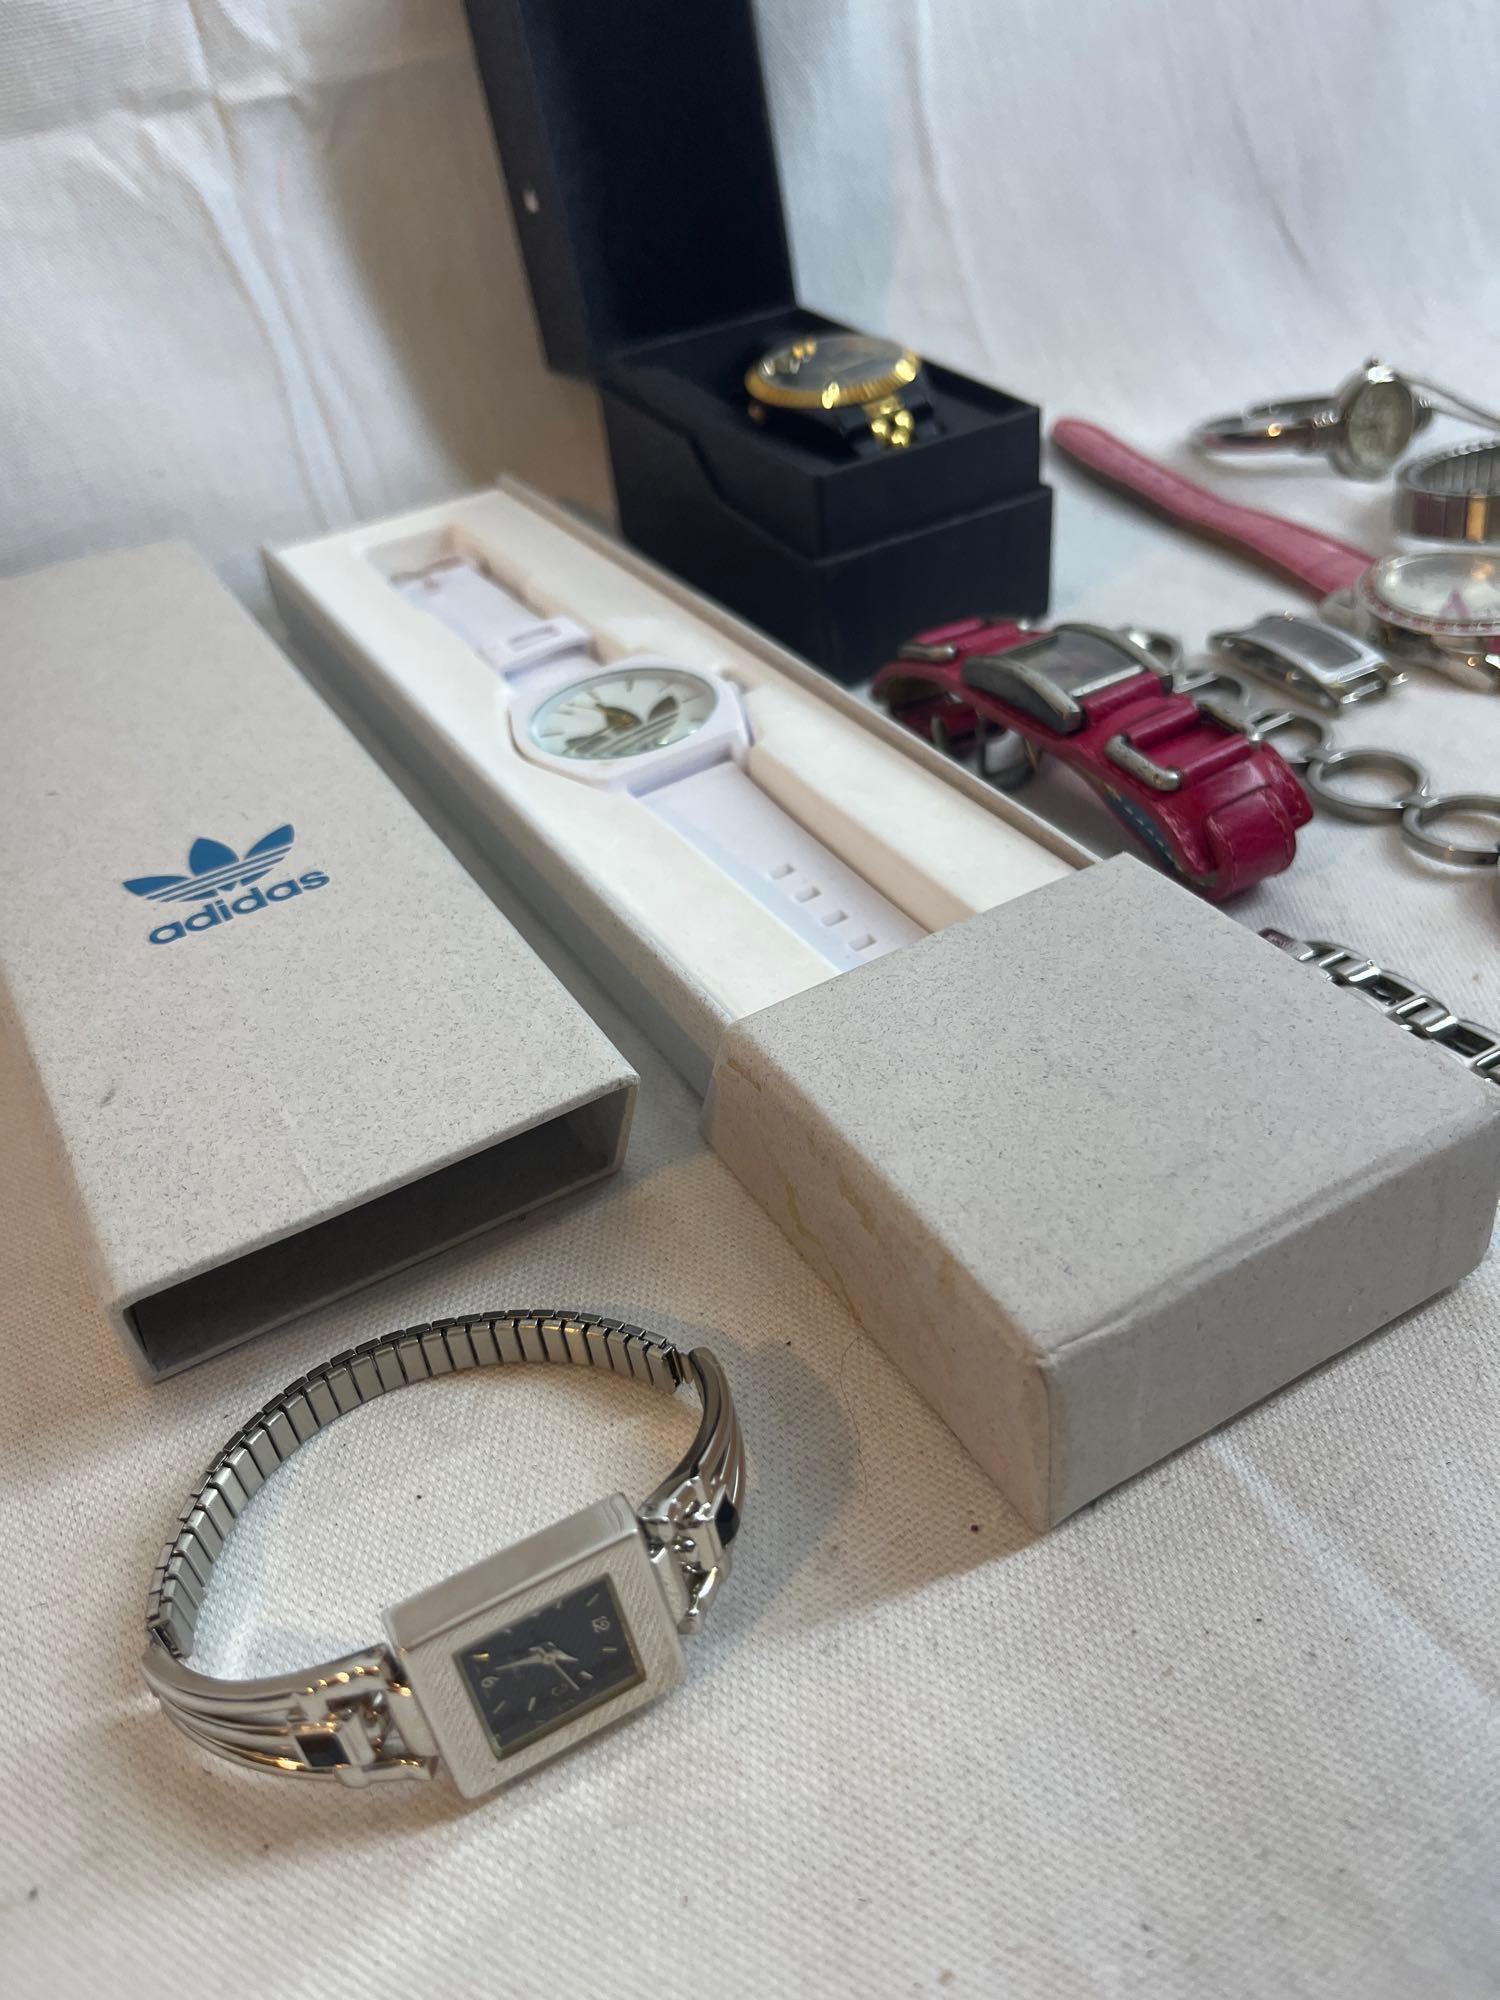 Watch lot including Adidas watch in box, silver and gold color watches